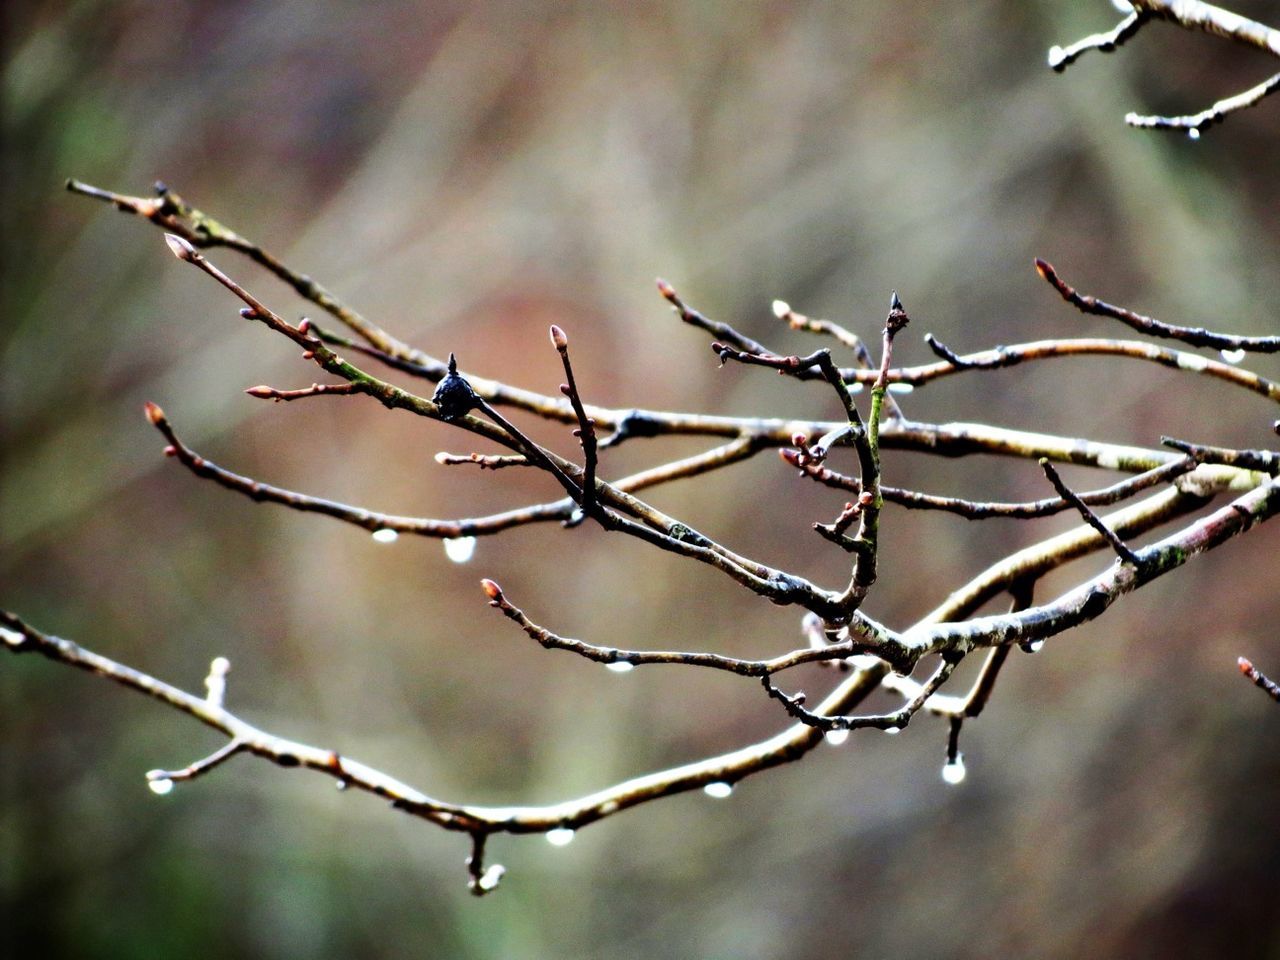 focus on foreground, close-up, twig, branch, nature, selective focus, drop, winter, plant, day, outdoors, weather, wet, cold temperature, frozen, water, season, tranquility, no people, dry